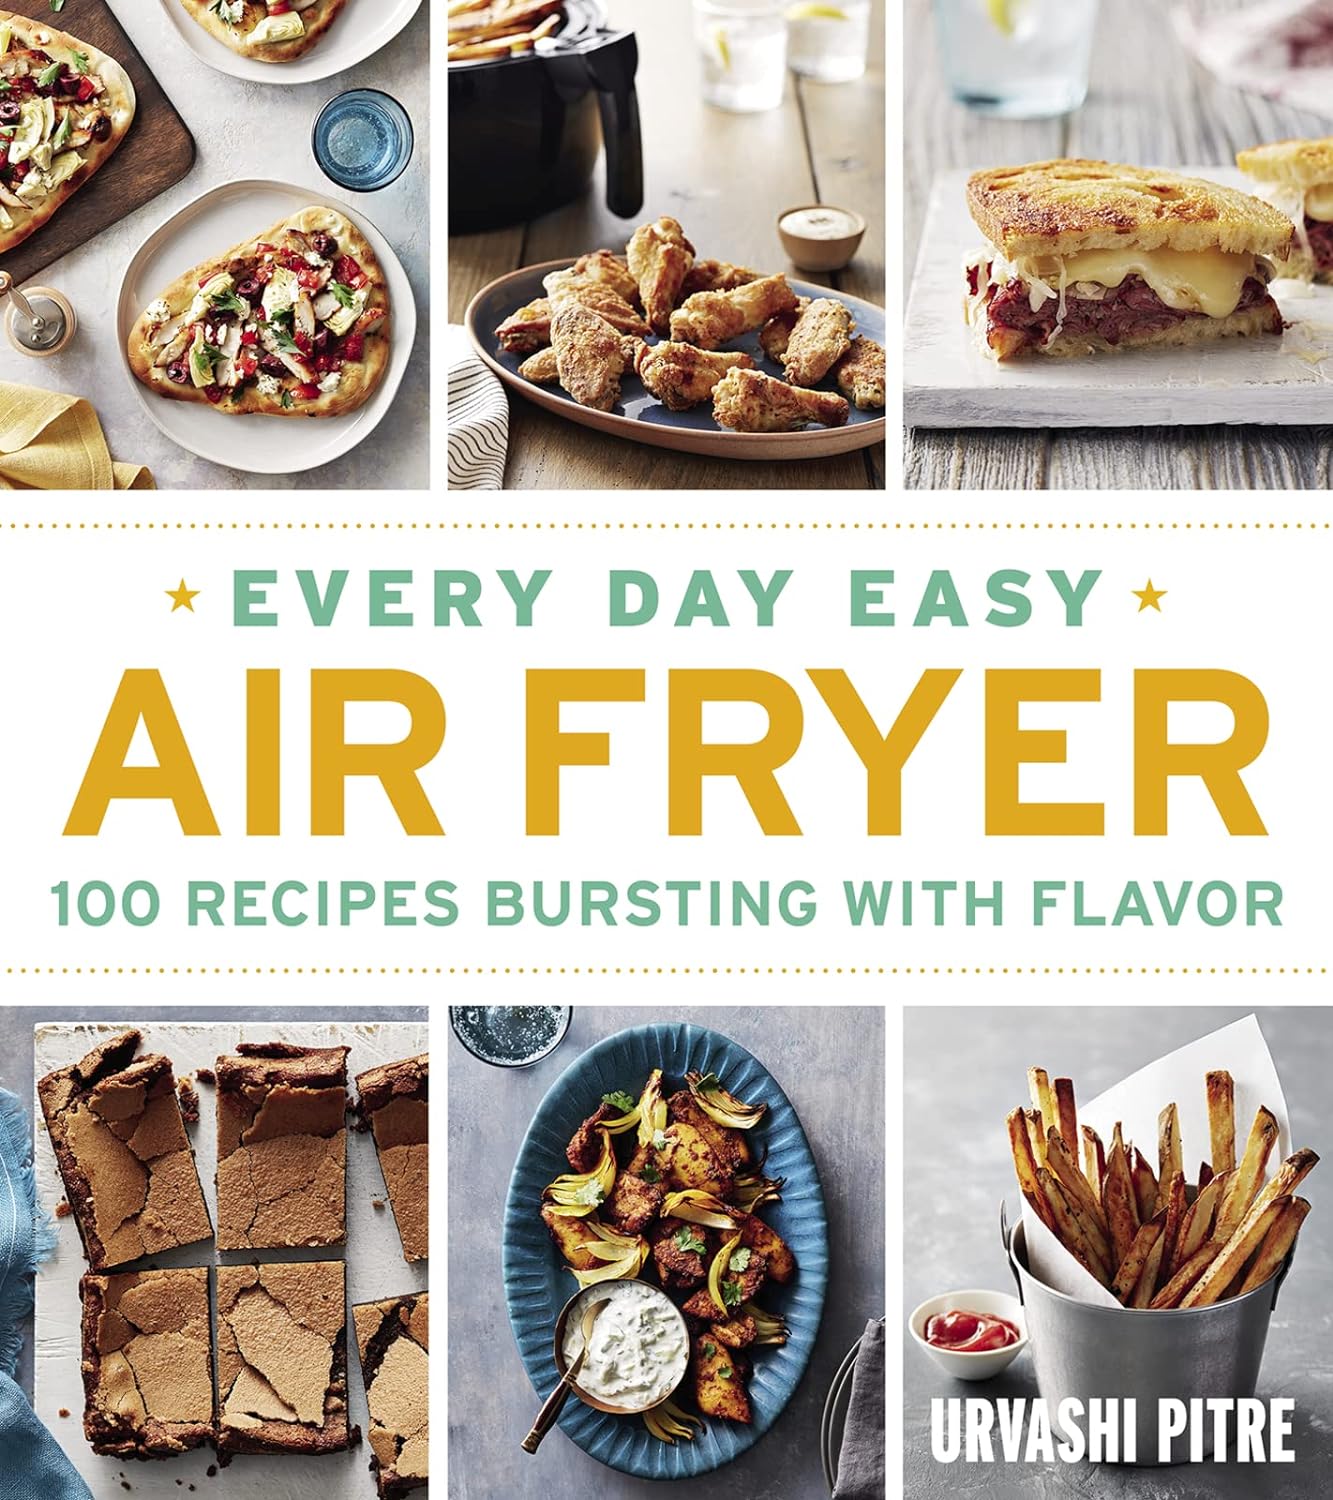 Every Day Easy Air Fryer: 100 Recipes Bursting with Flavor (Urvashi Pitre)